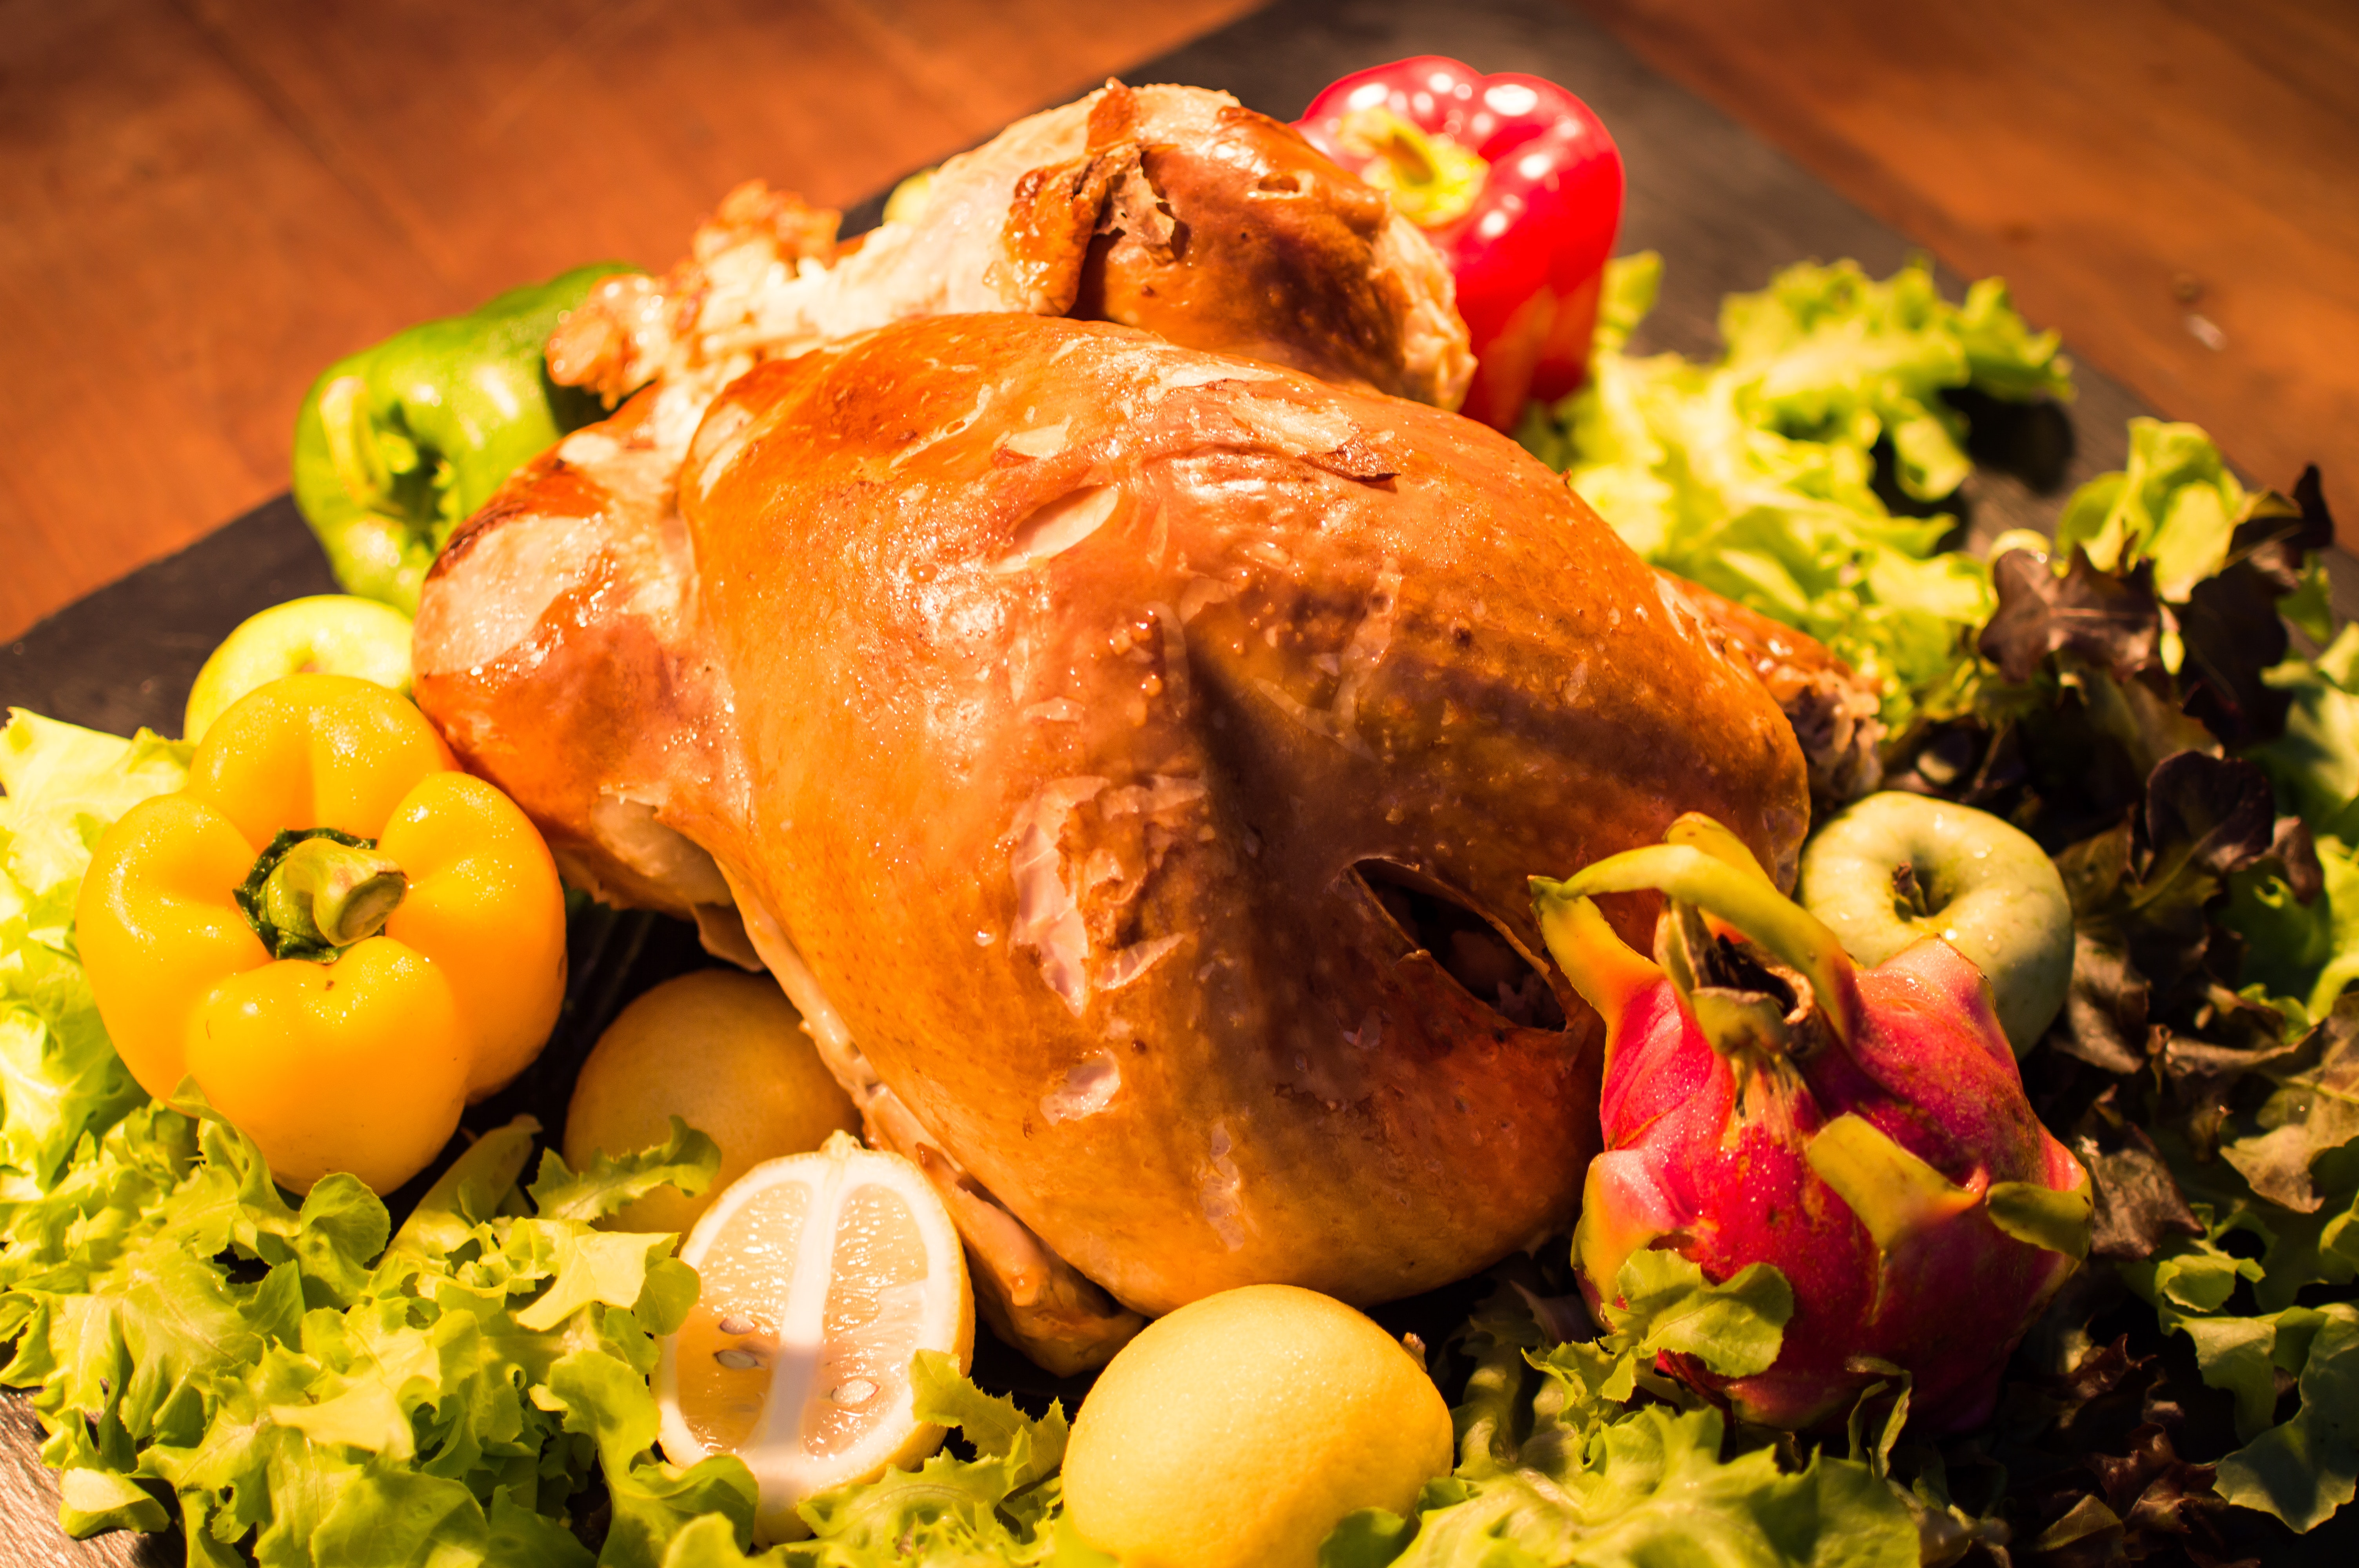 Delicious roasted chicken photo